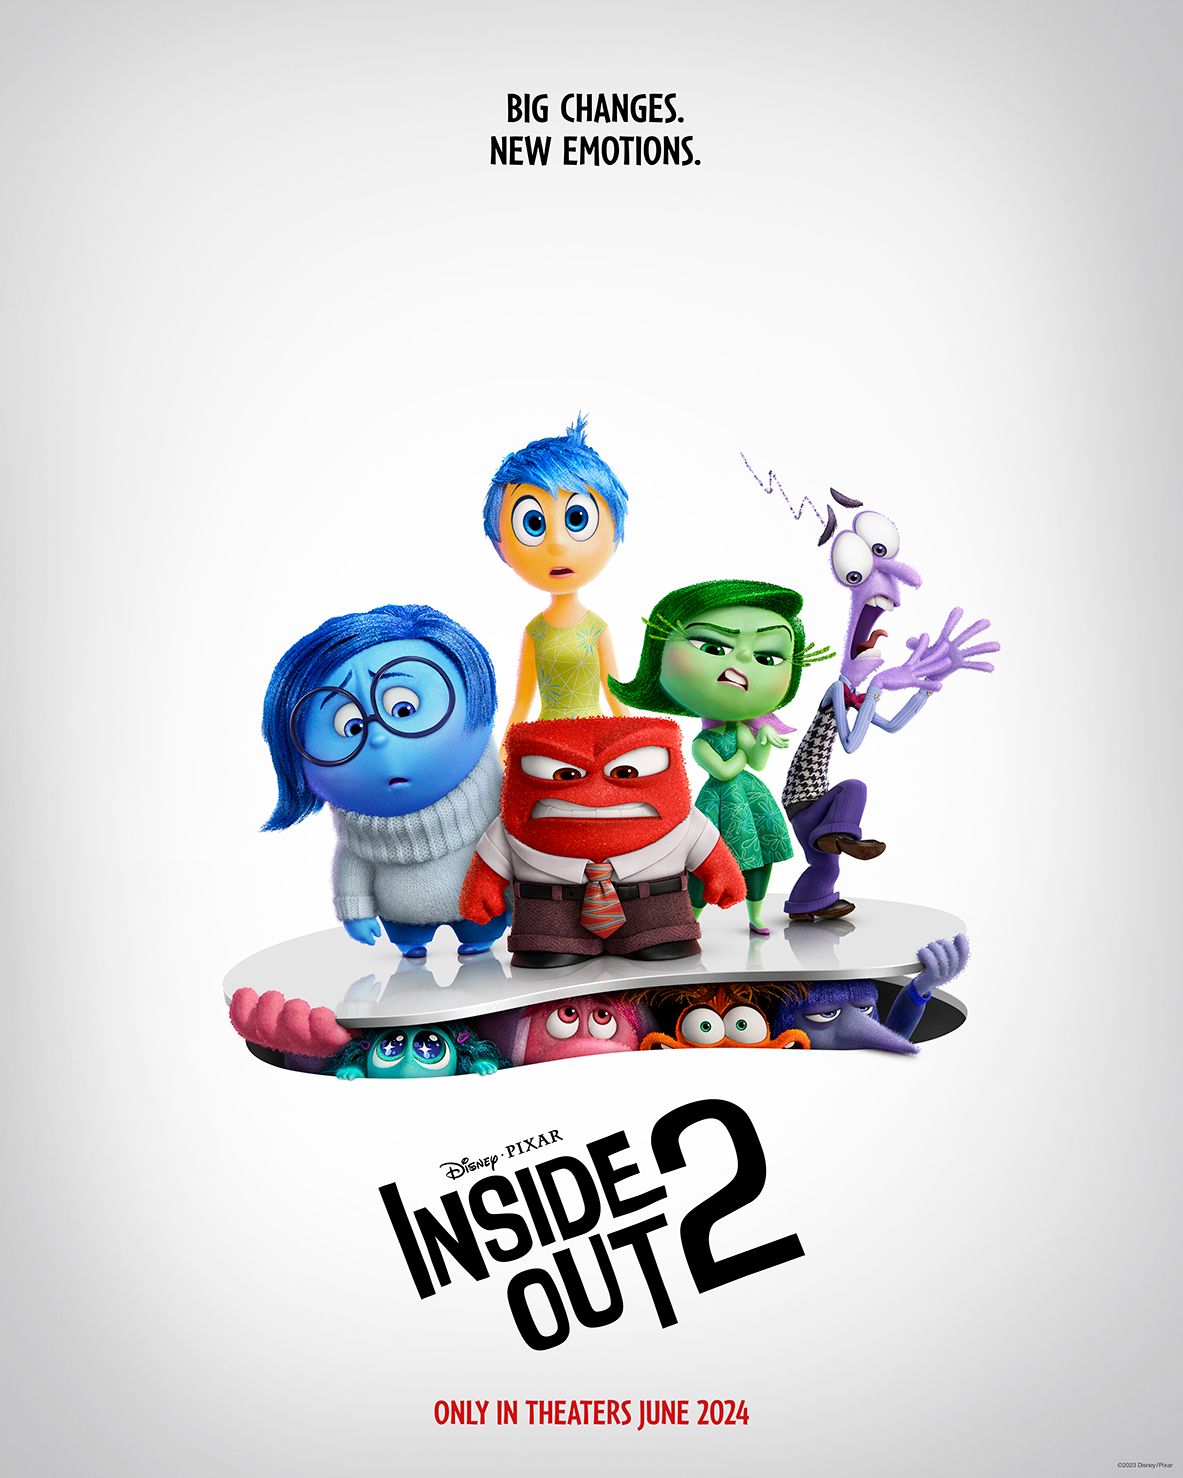 The poster for Inside Out 2